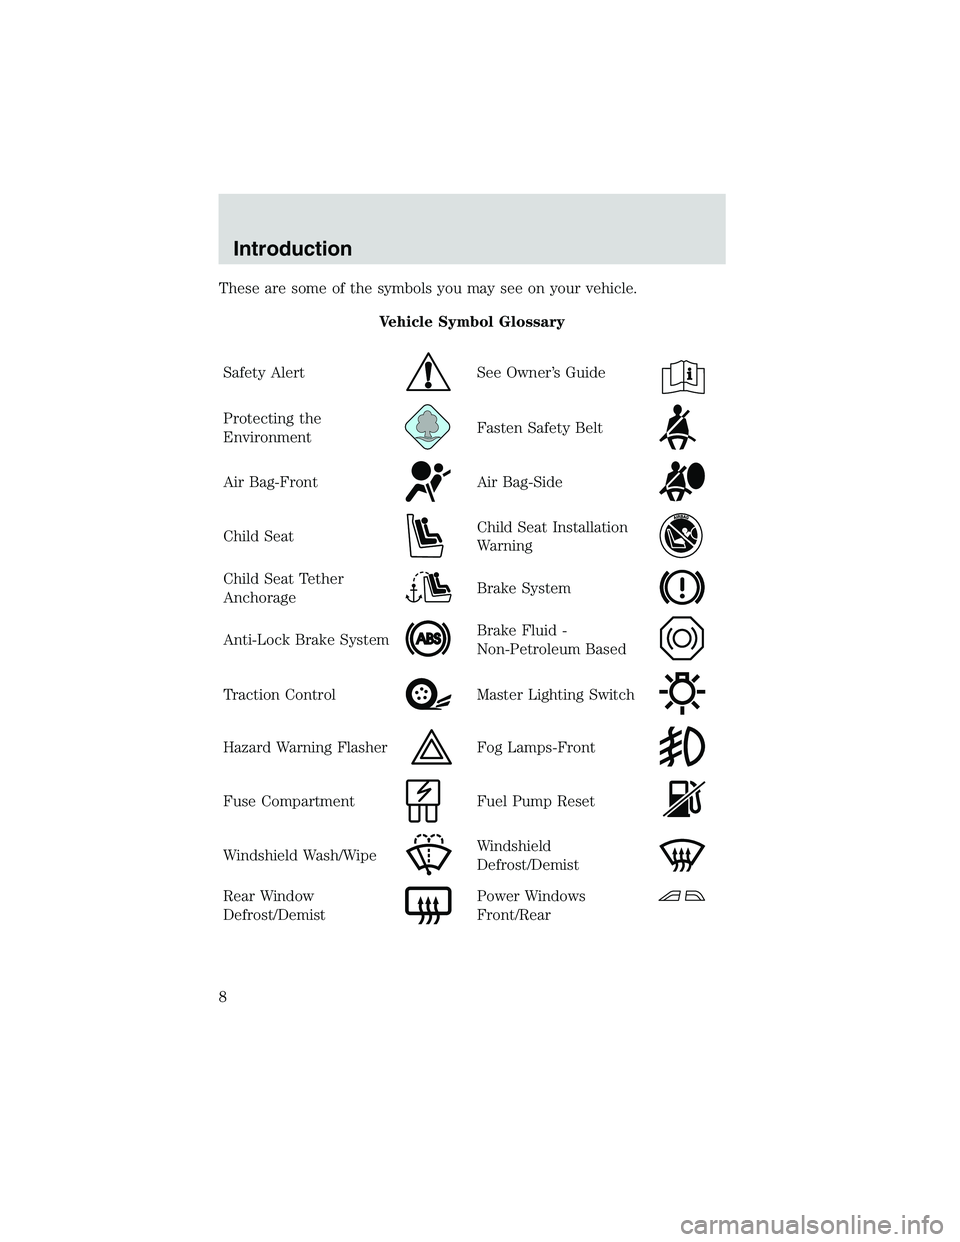 MAZDA MODEL B4000 4WD 2002  Owners Manual These are some of the symbols you may see on your vehicle.Vehicle Symbol Glossary
Safety Alert
See Owner’s Guide
Protecting the
EnvironmentFasten Safety Belt
Air Bag-FrontAir Bag-Side
Child SeatChil